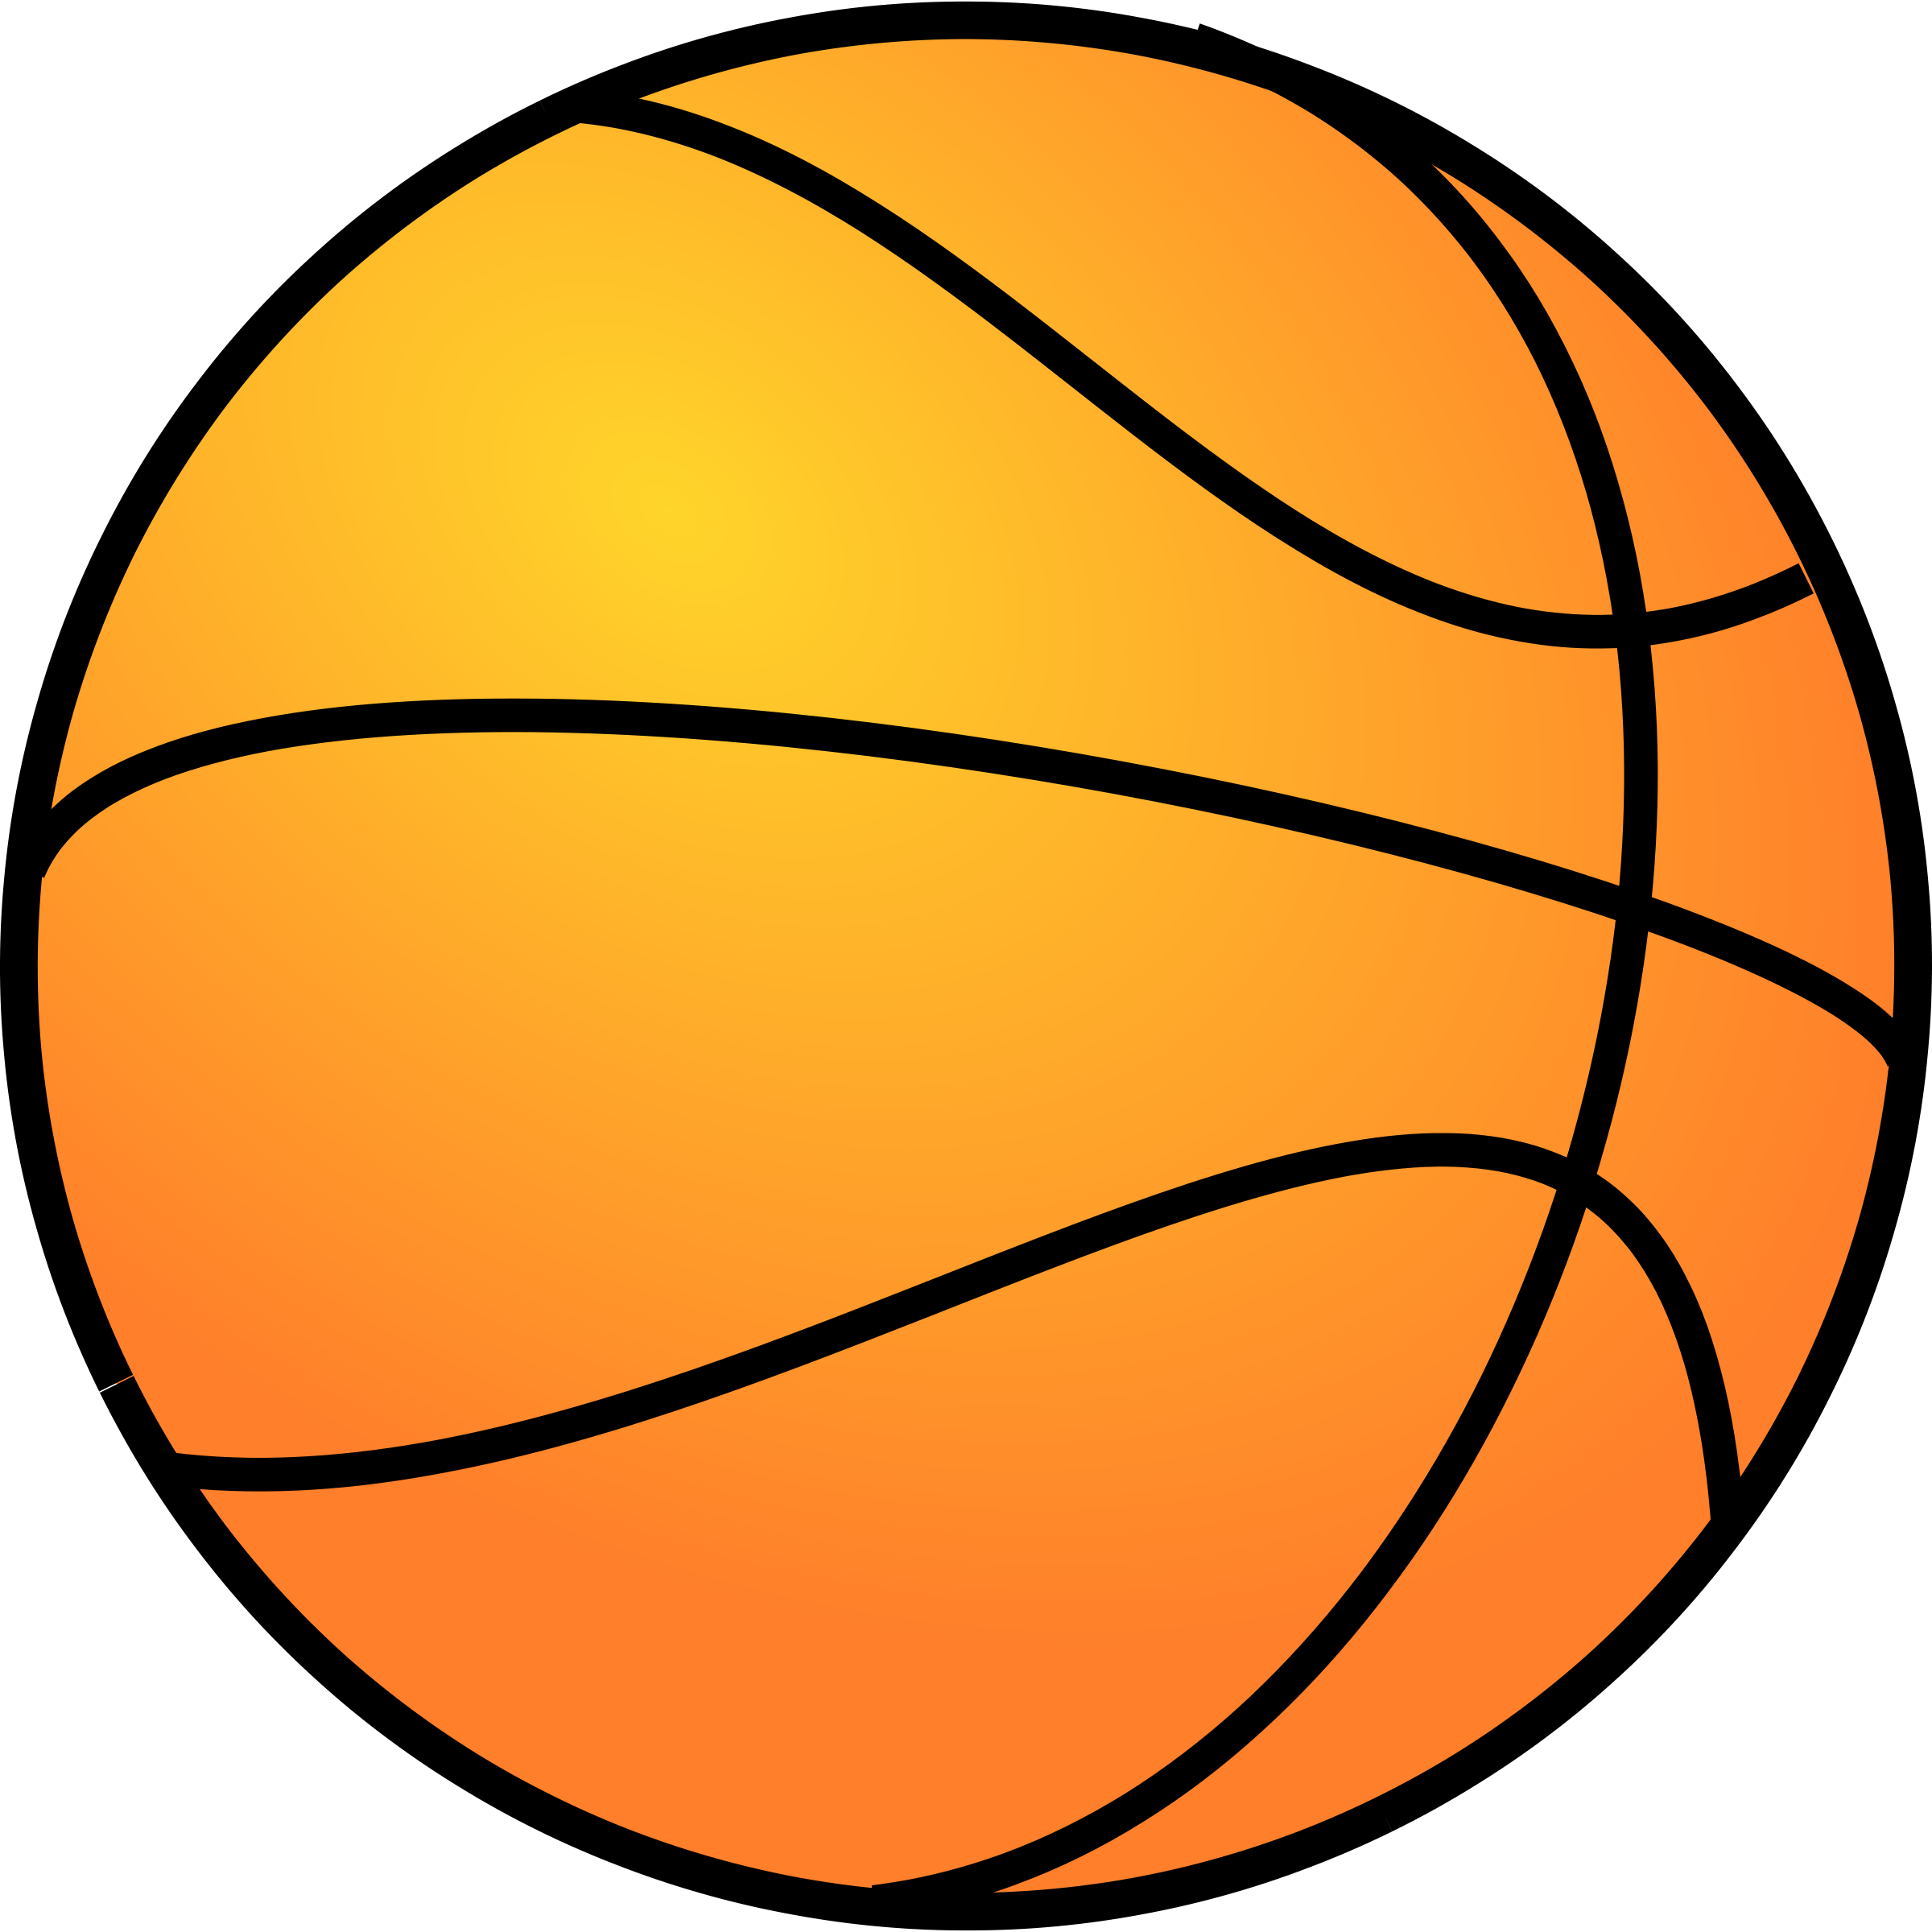 Basketball clipart free clipart images